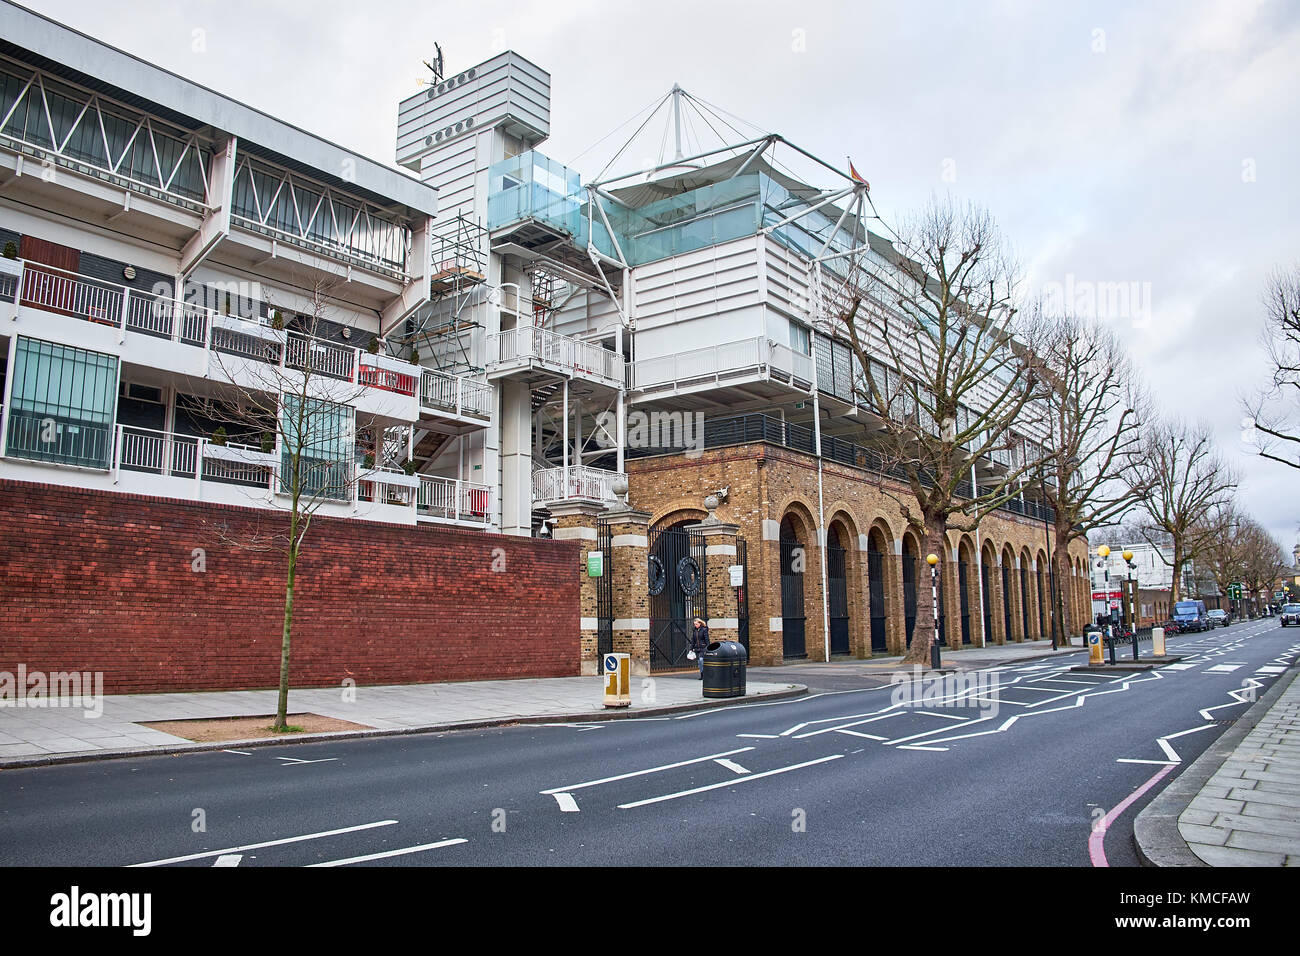 LONDON CITY - DECEMBER 25, 2016: The facade of Lord's Cricket Ground with an empty street on Christmas Day Stock Photo